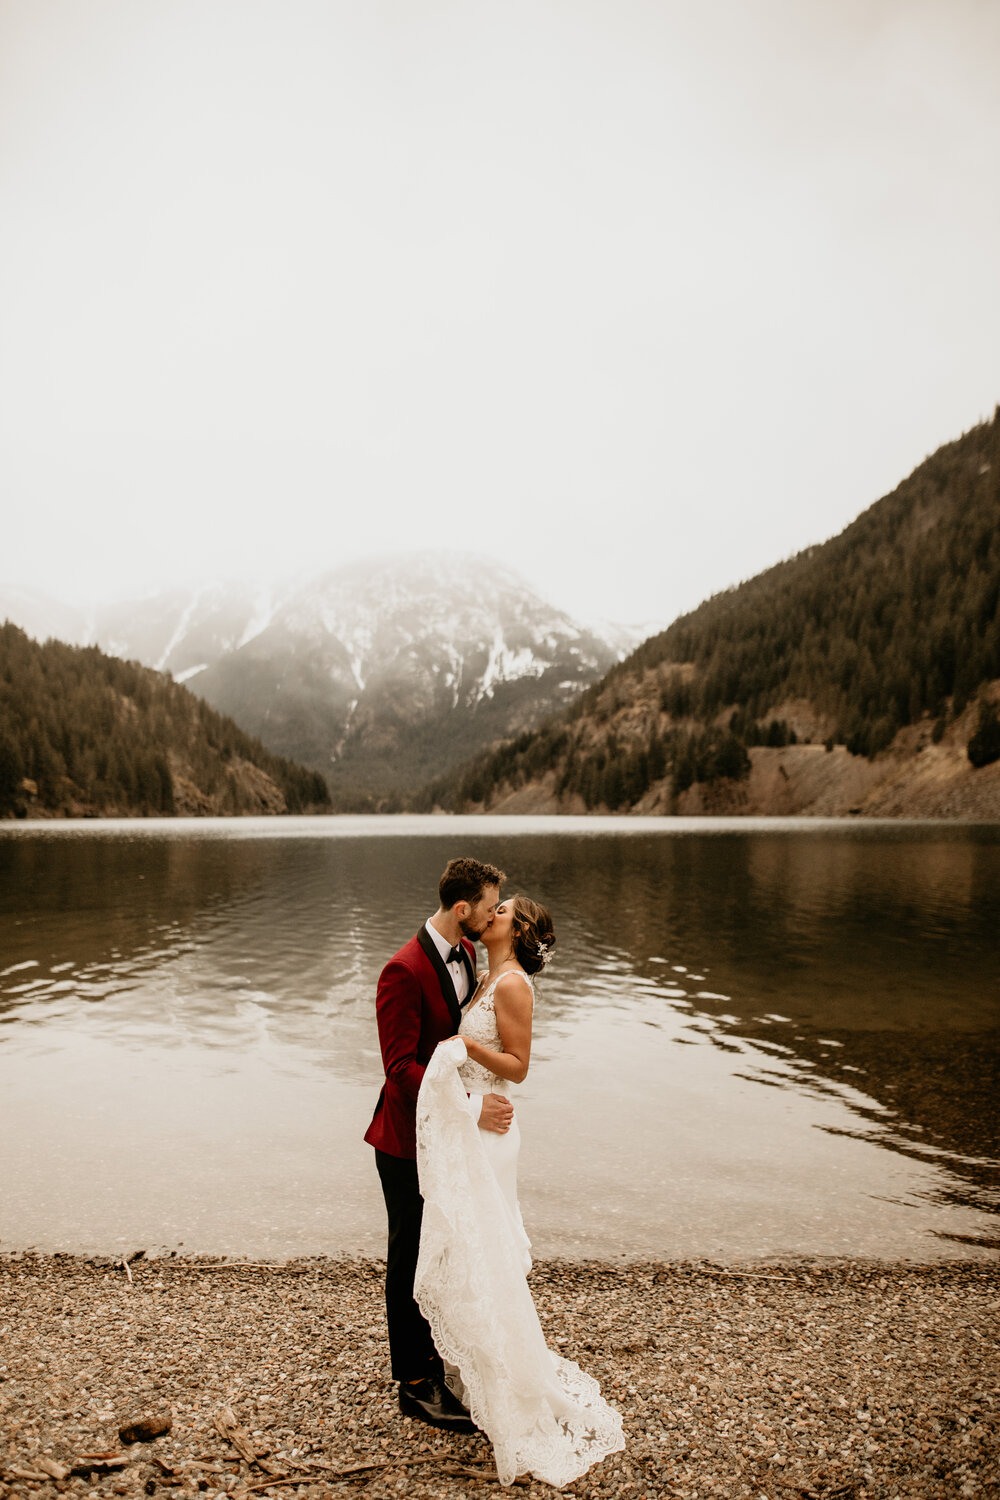 where to get married in washington